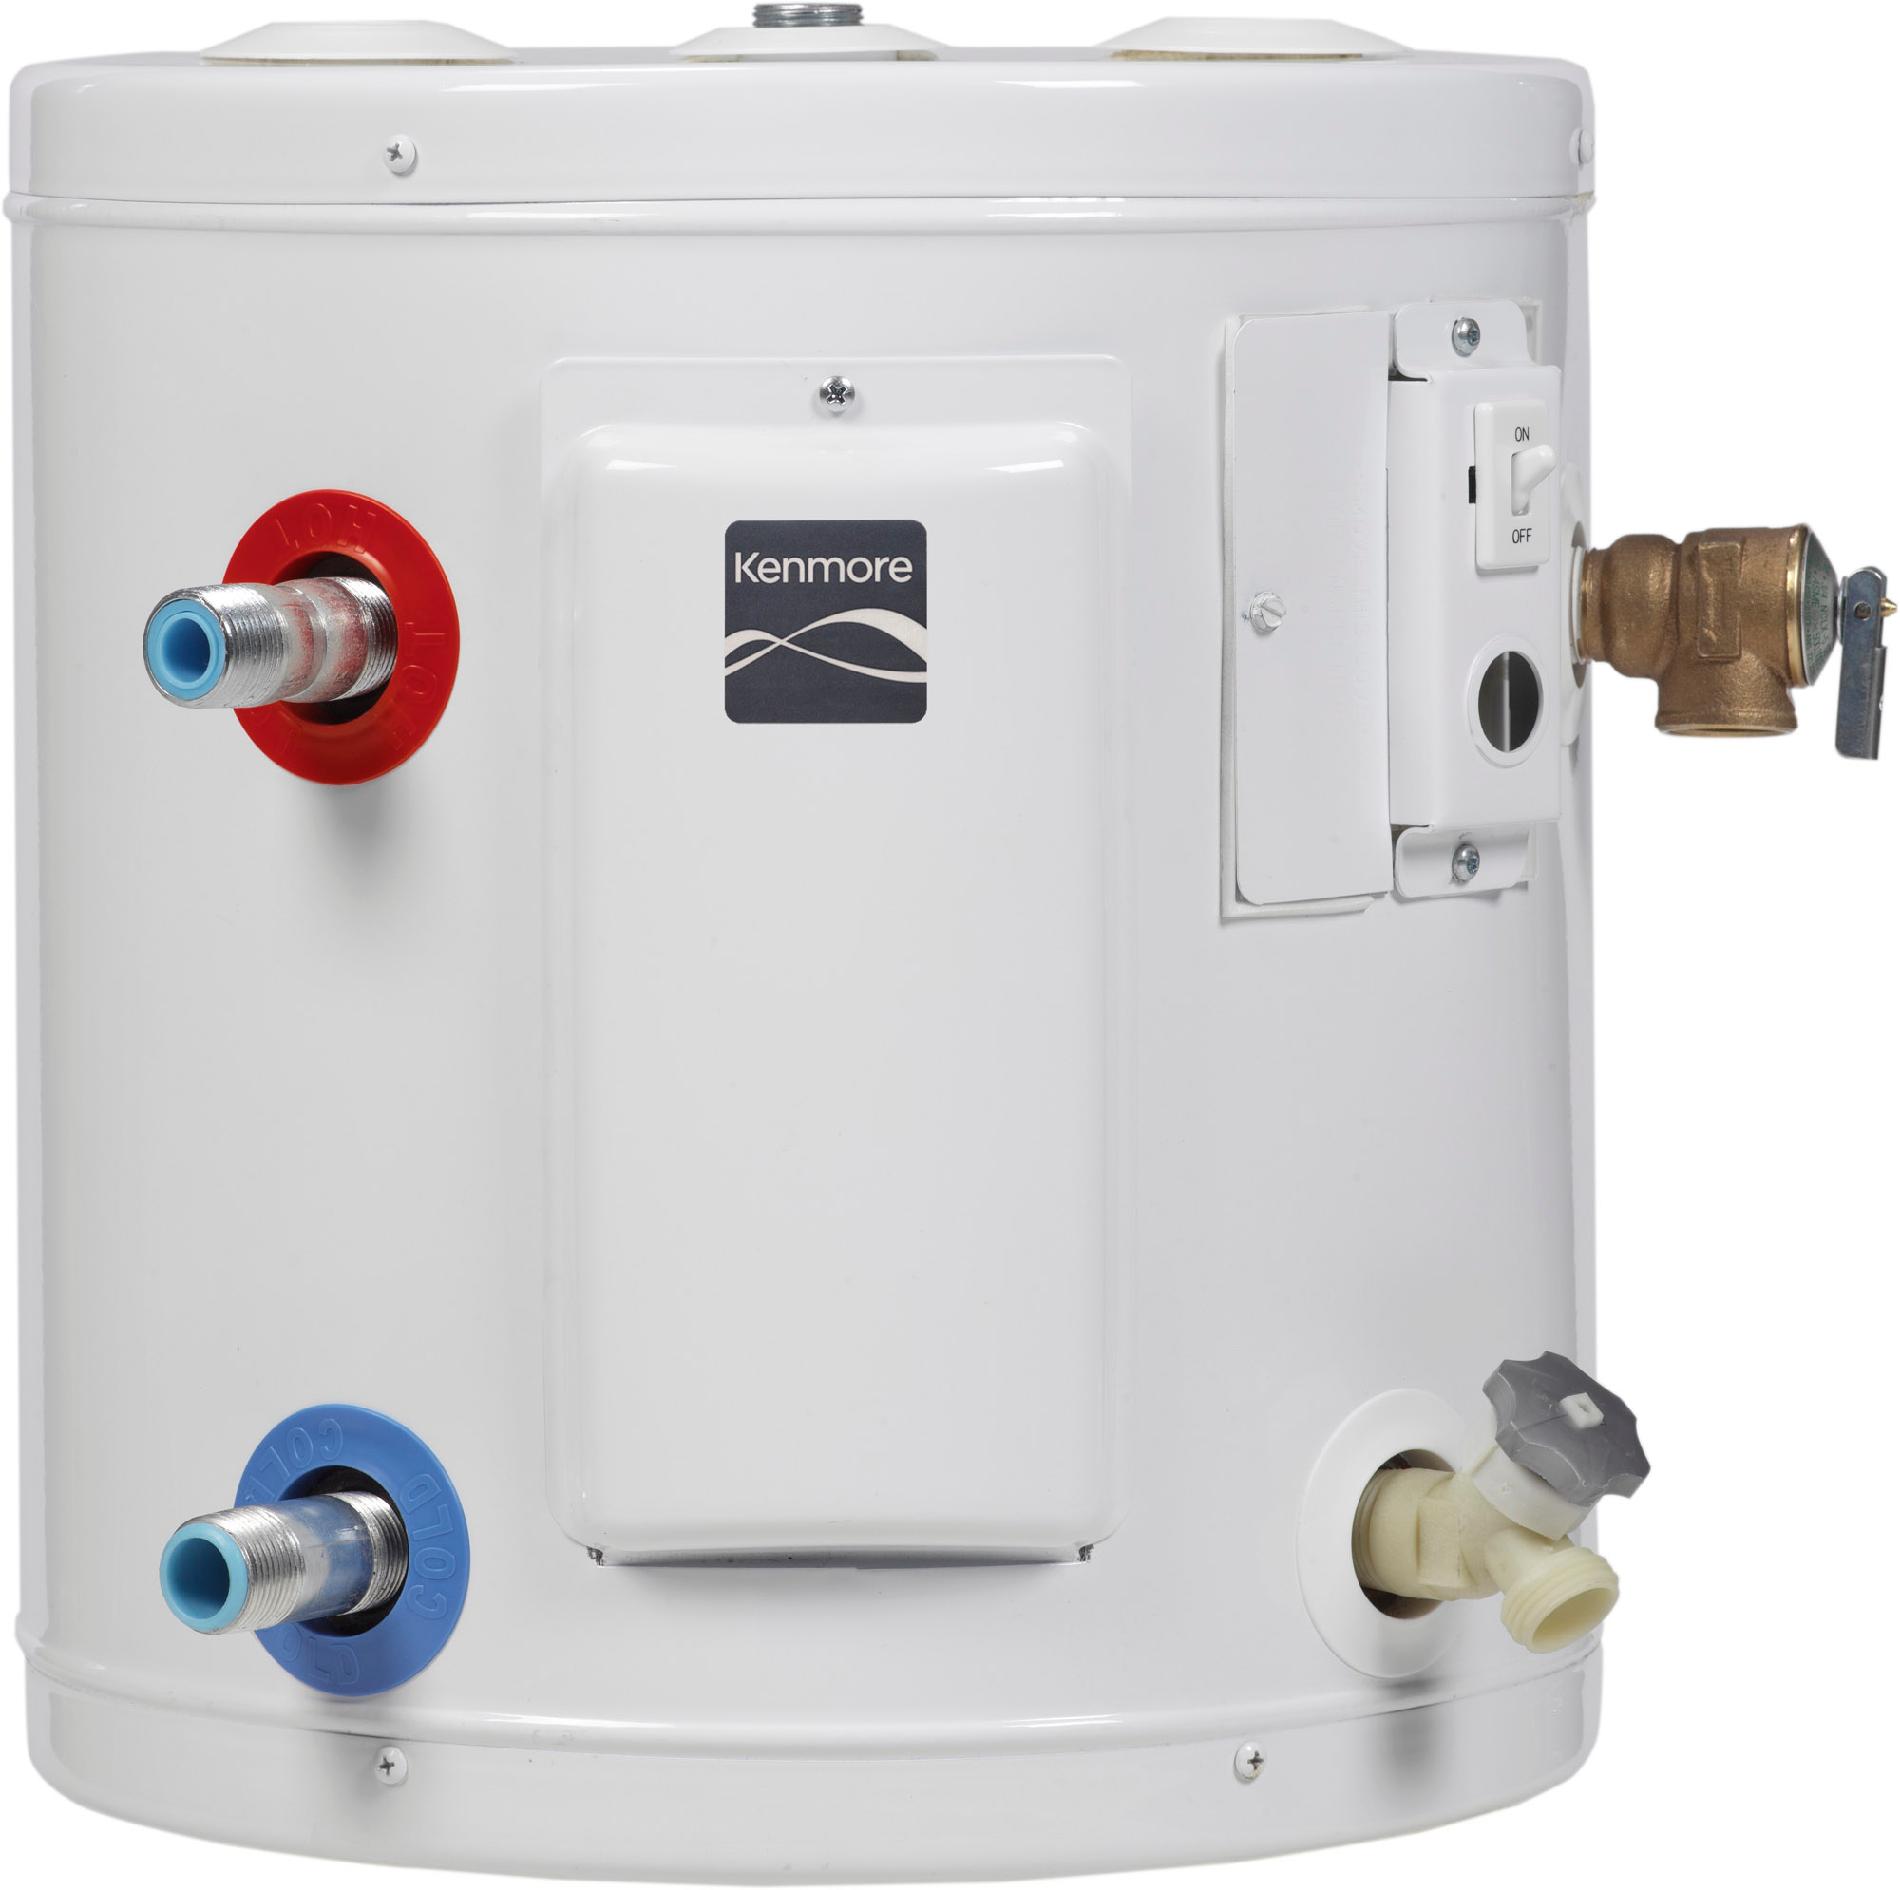 upc-633815600877-20-gal-6-year-tall-compact-electric-water-heater